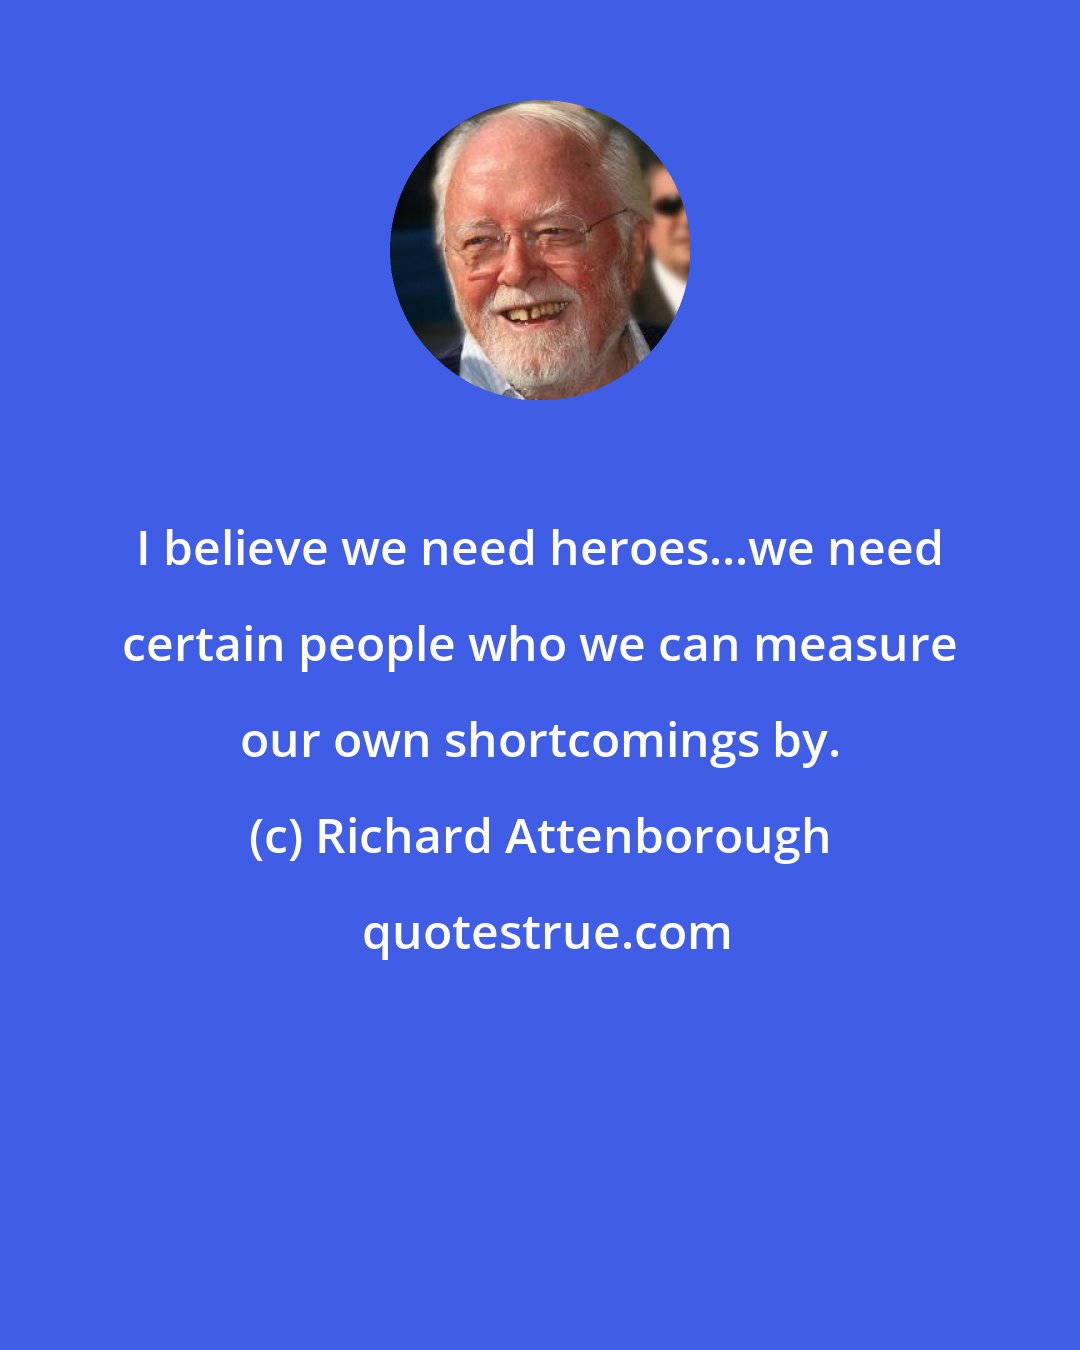 Richard Attenborough: I believe we need heroes...we need certain people who we can measure our own shortcomings by.